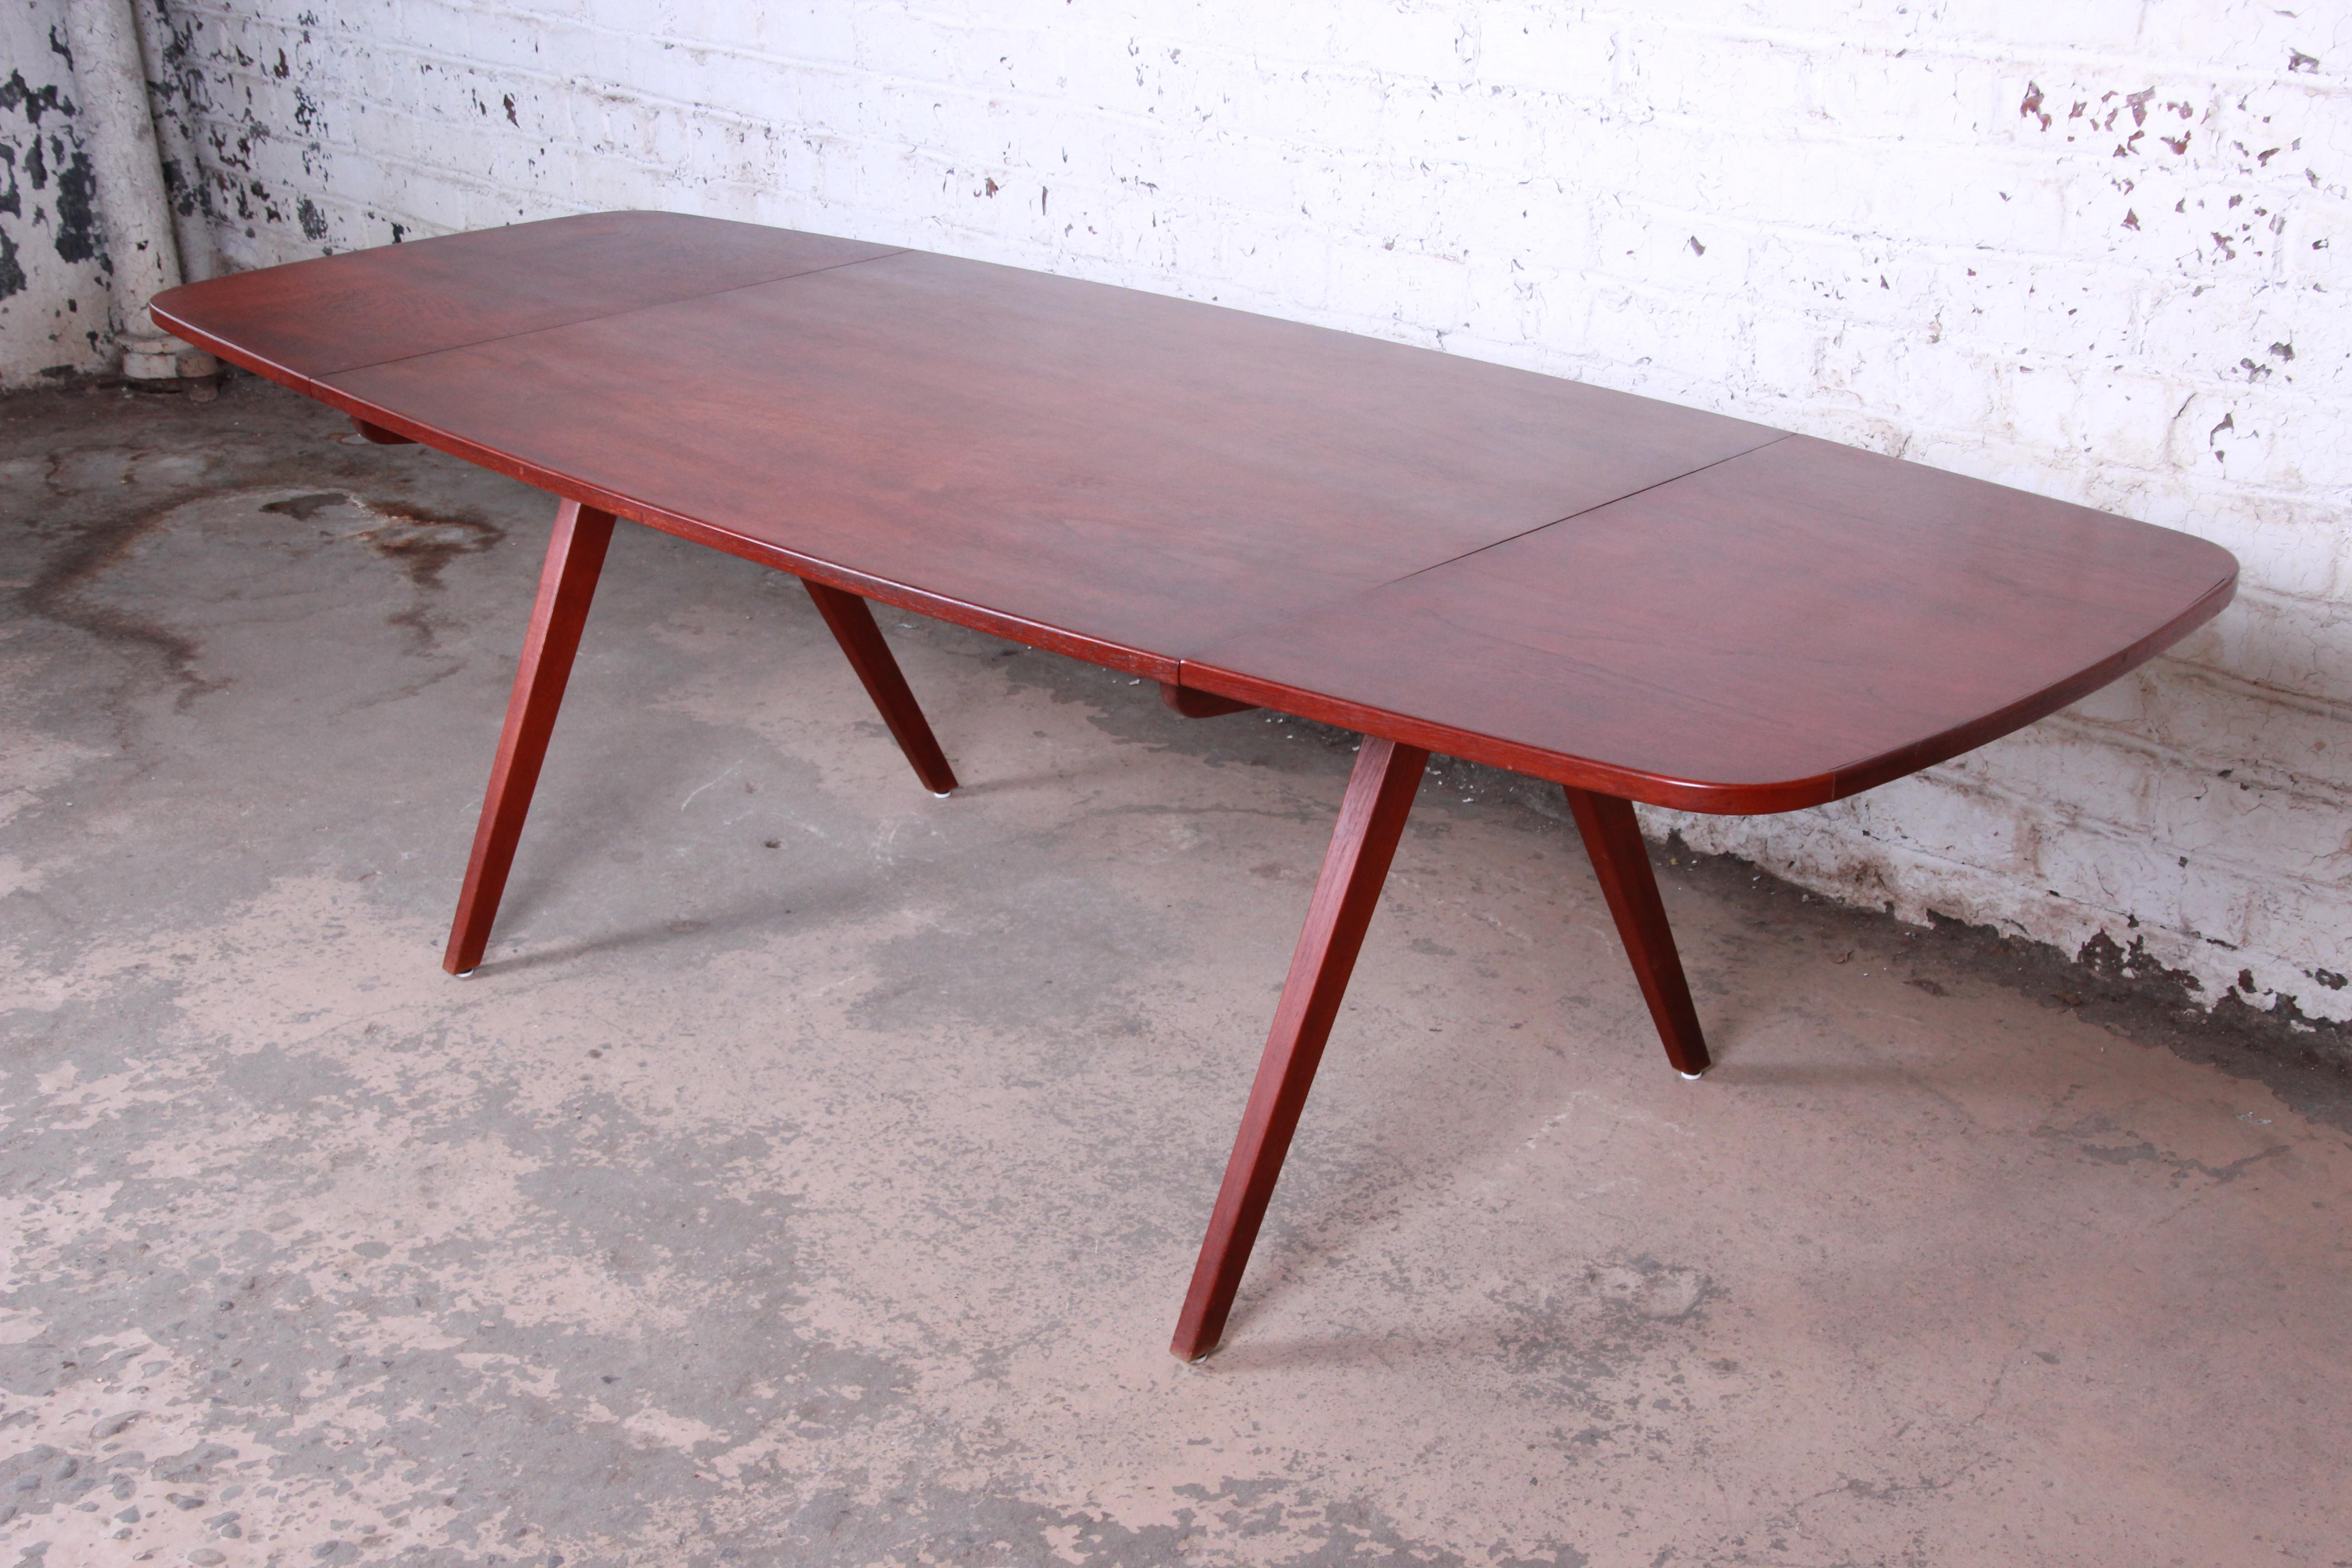 An outstanding Danish modern teak dining table designed by Poul Volther, circa 1950. The table features gorgeous wood grain and sleek, Minimalist midcentury Danish design. The boat-shaped top rests on unique solid teak scissor legs, and each end of